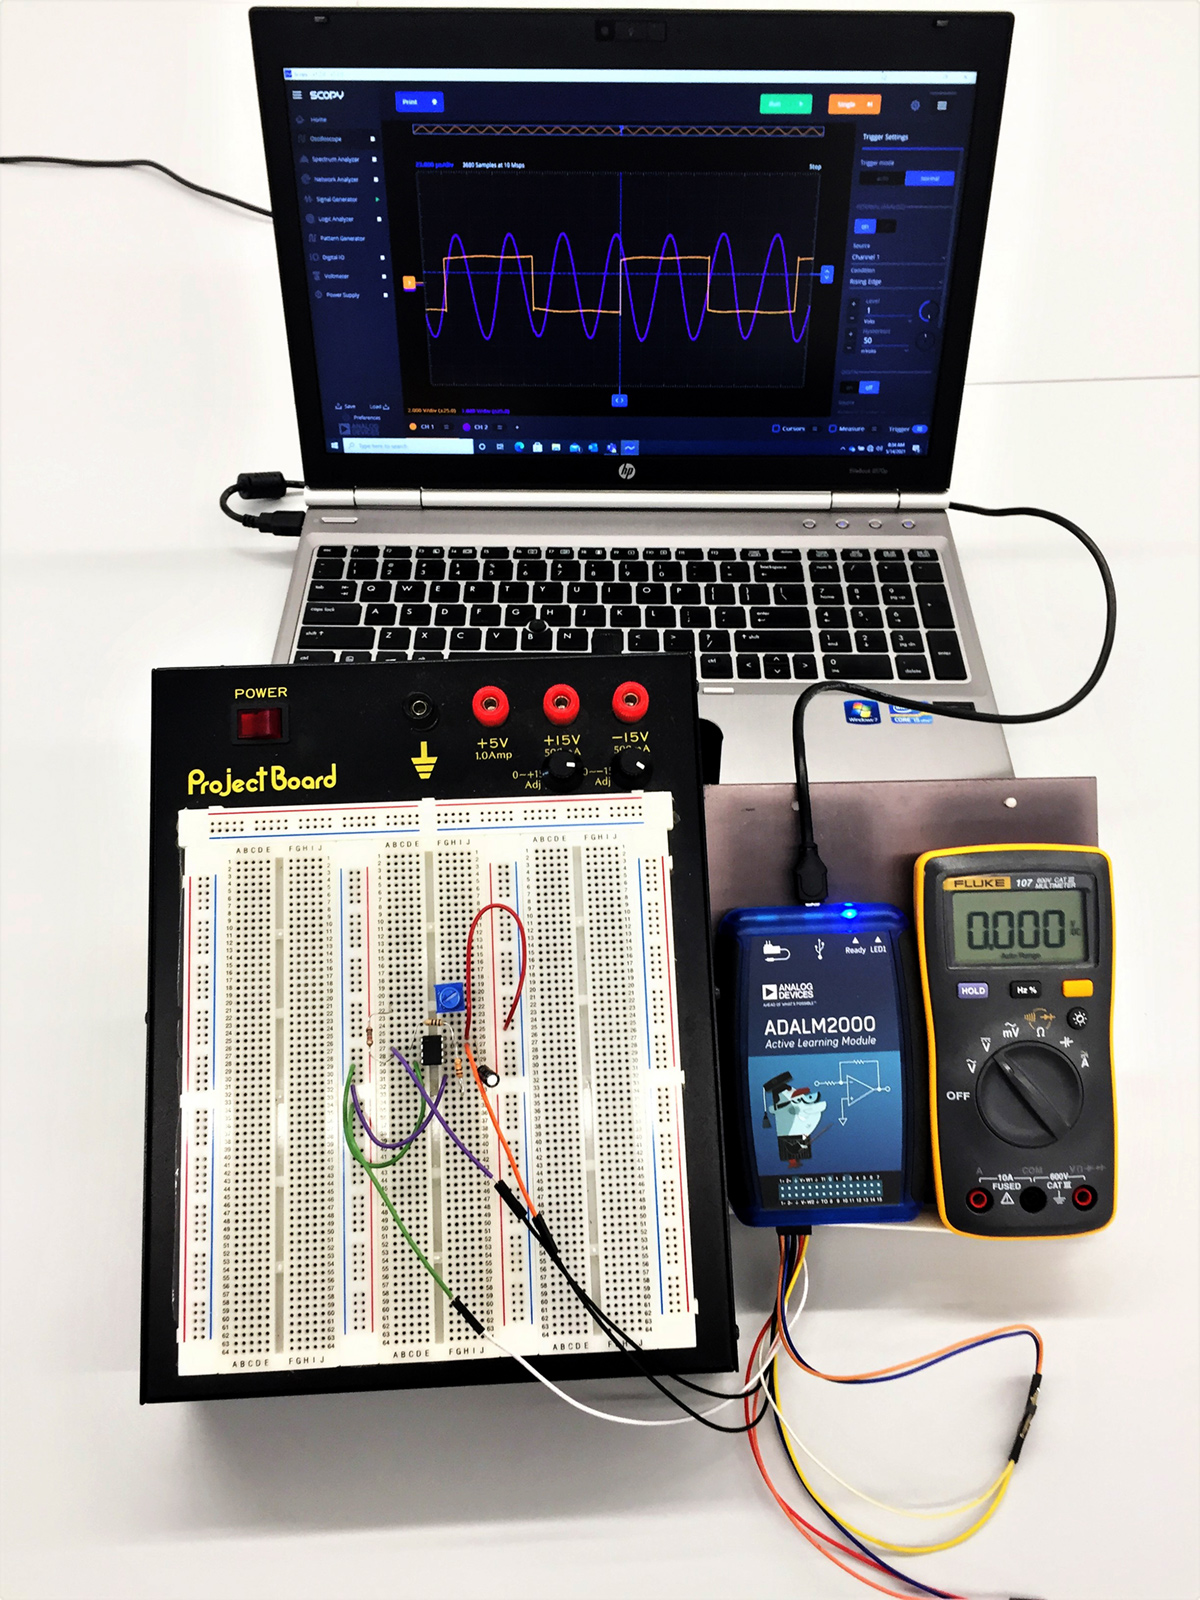 The typical setup of the at-home lab kit in use with a laptop computer. The ADALM2000 interfaces with the software on the laptop computer to allow students to generate signals and make measurements of the lab circuits which provide real-time data to compare with the simulation data set.